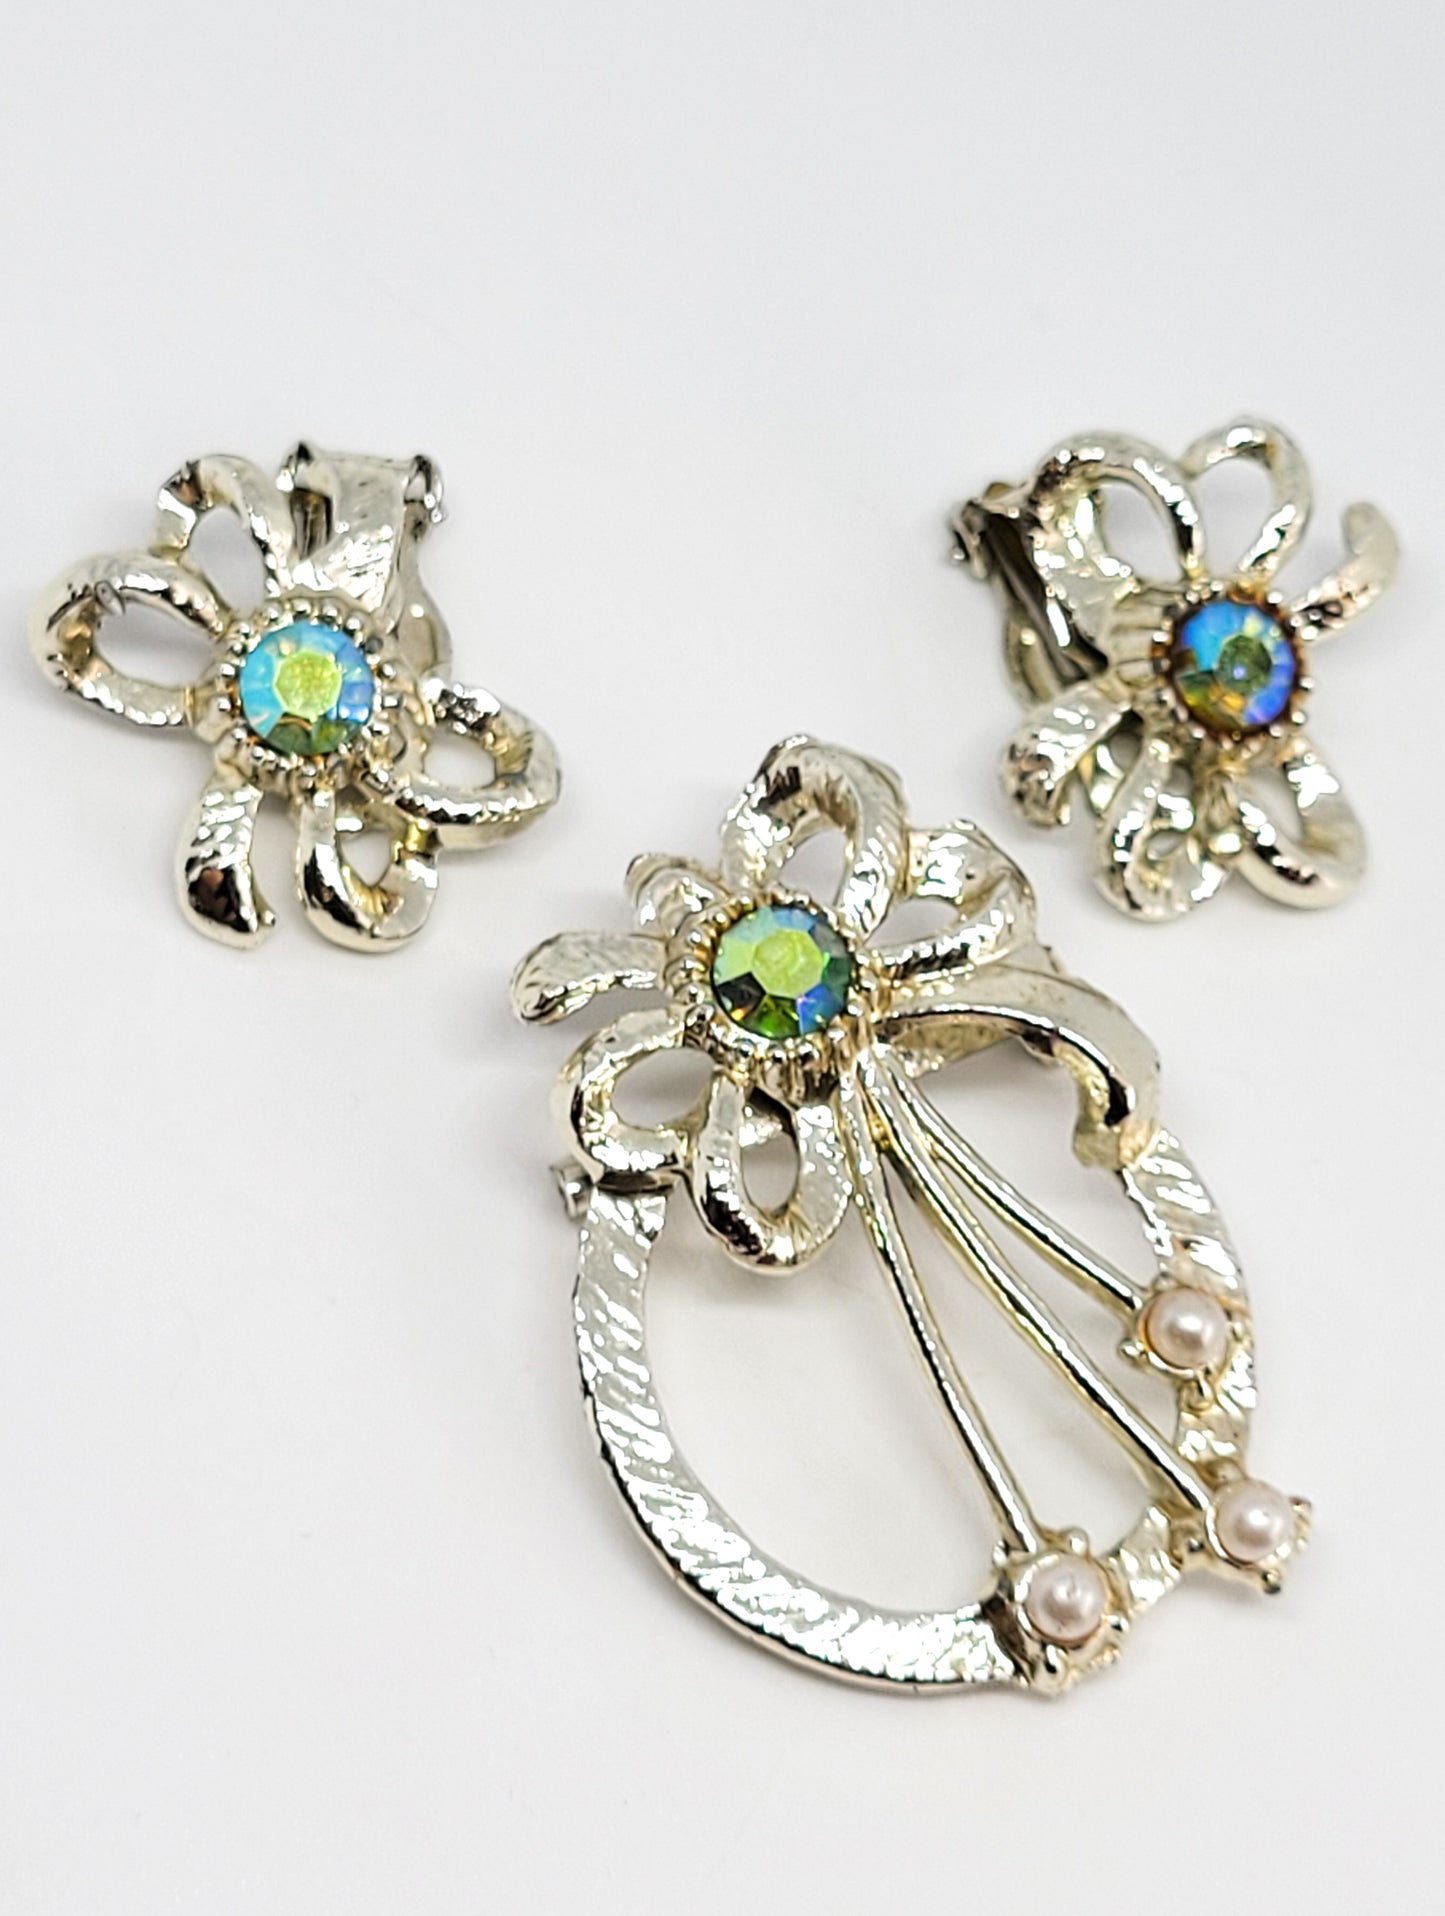 Blue Peacock aurora borealis and faux pearl demi parure set earrings and brooch